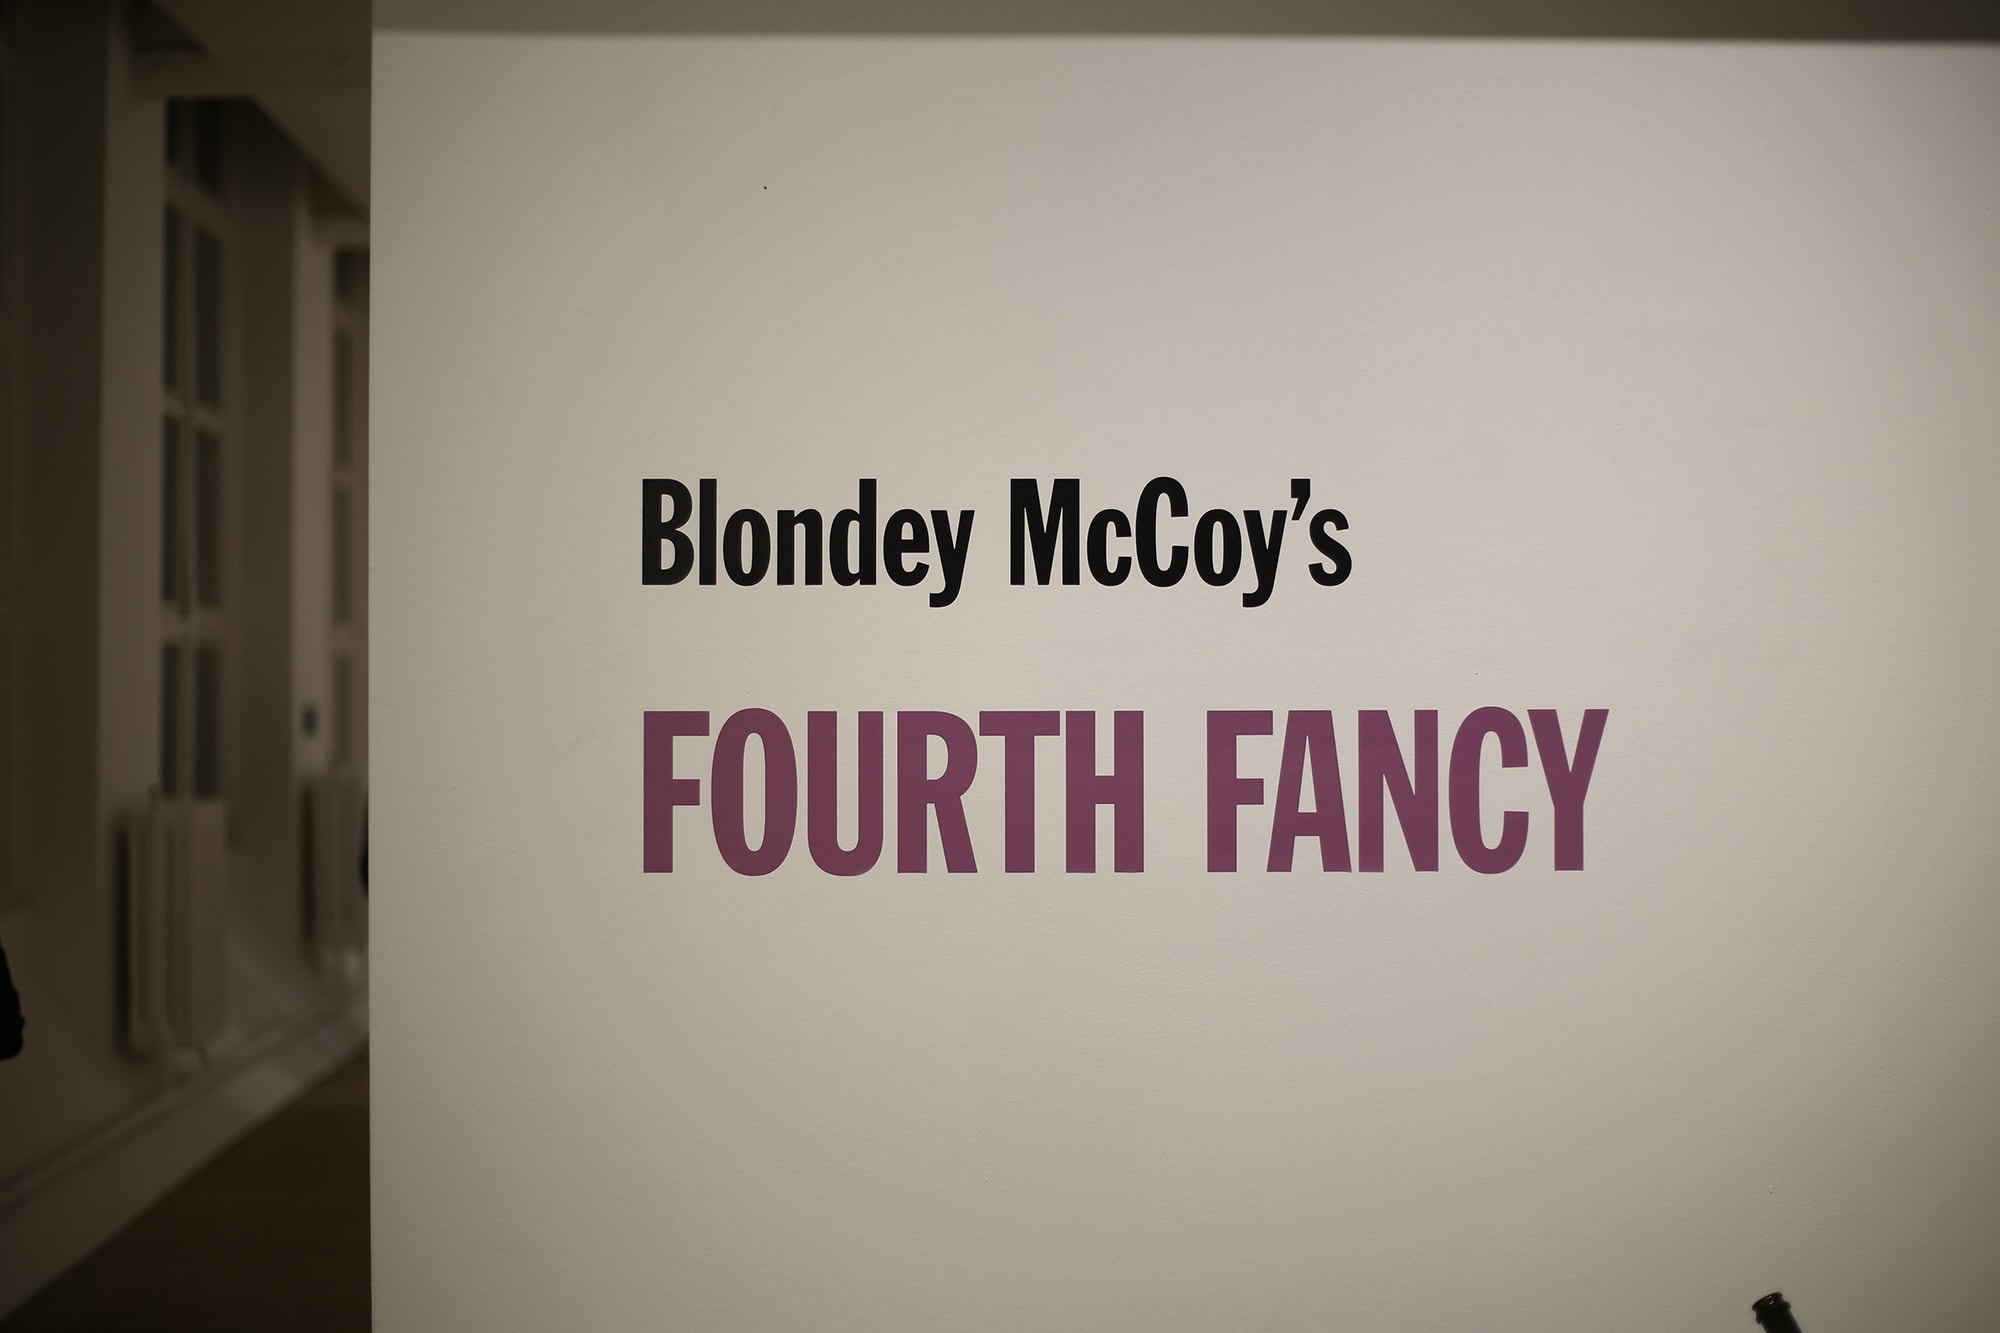 Blondey McCoy Fourth Fancy Art Exhibition Gallery Images